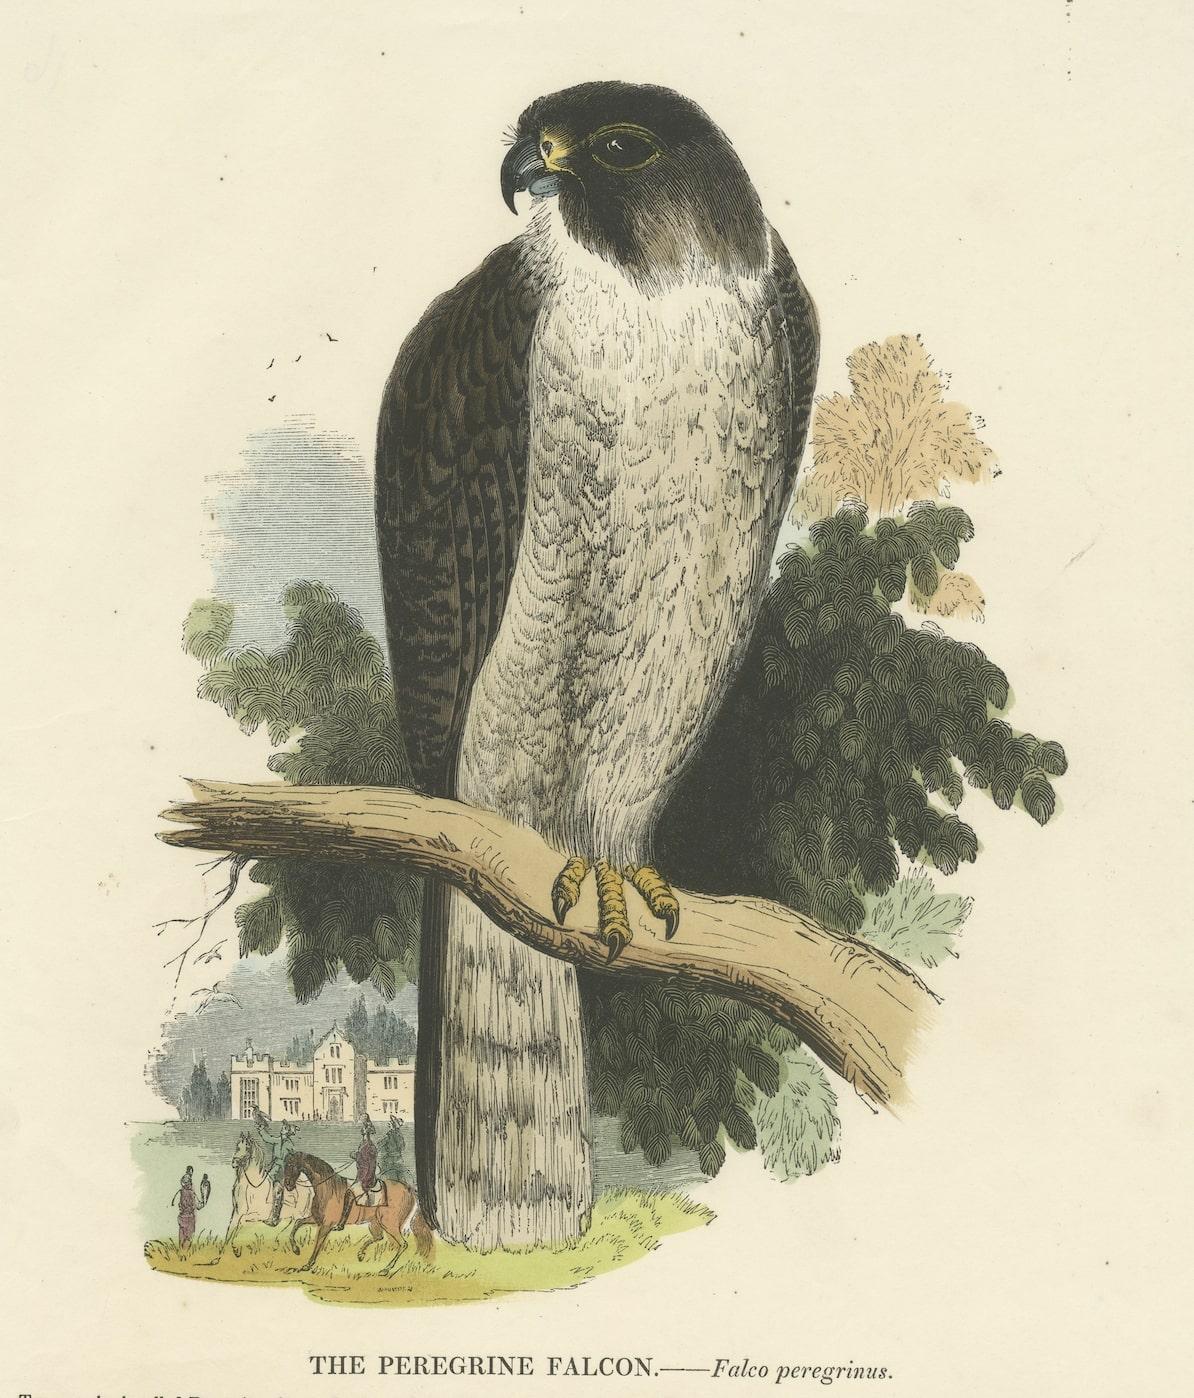 This 1843 wood engraving, meticulously hand-colored, unveils the Peregrine Falcon (Falco peregrinus) in stunning detail, captured by the skilled hand of Josiah Wood Whymper (1813-1903). Part of P. H. Gosse's 'Natural History, Birds,' this print